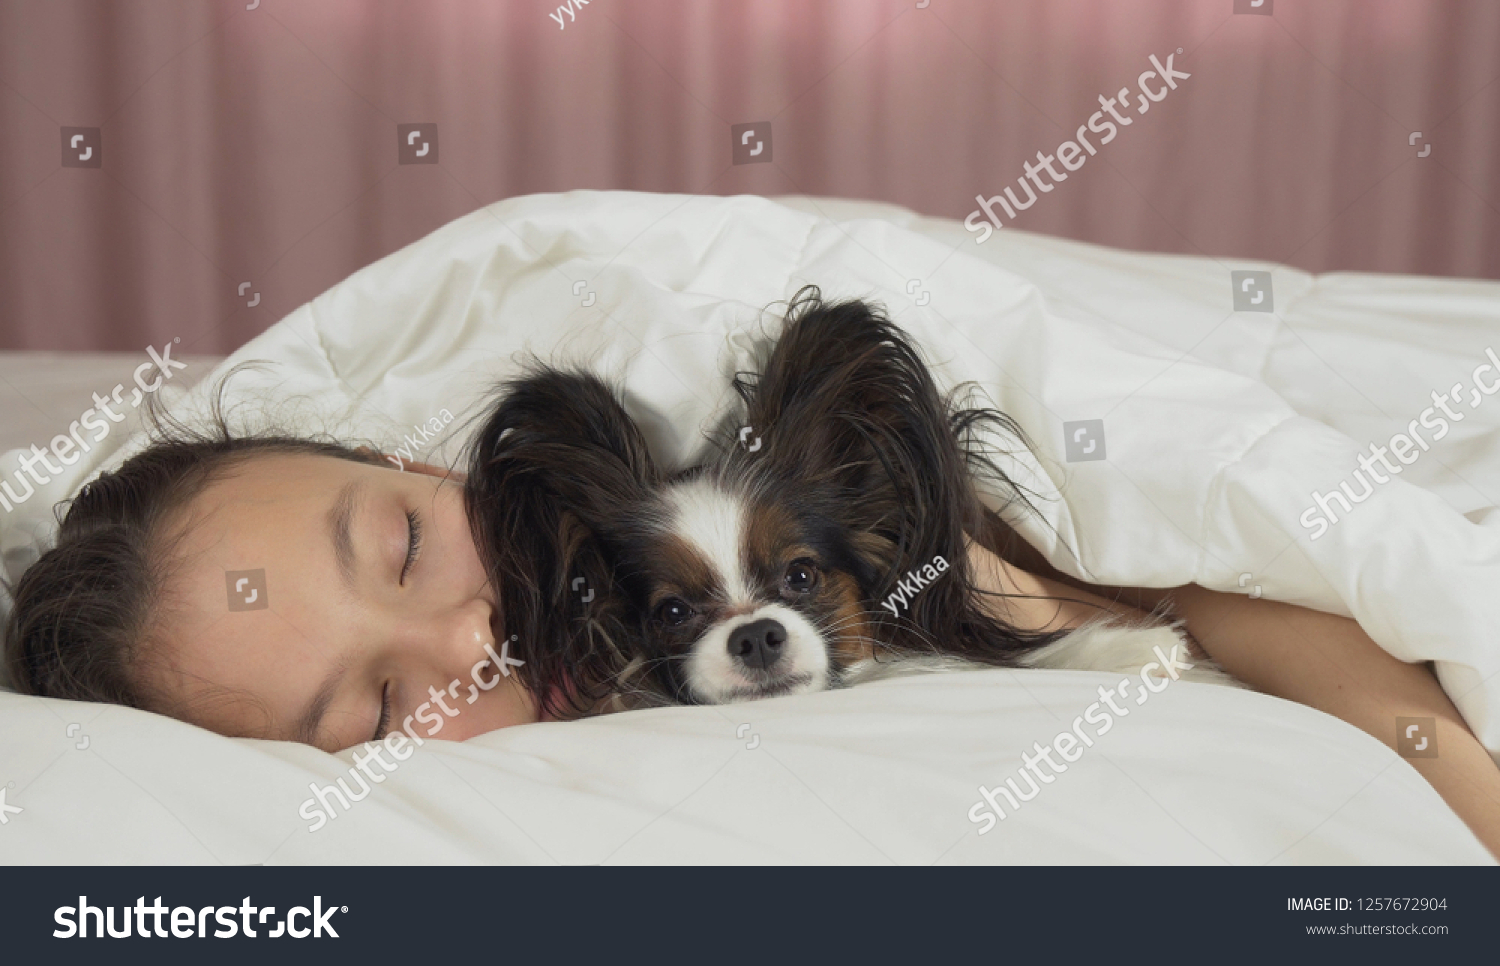 Beautiful teen girl sleeping sweetly in bed with a Papillon dog #1257672904